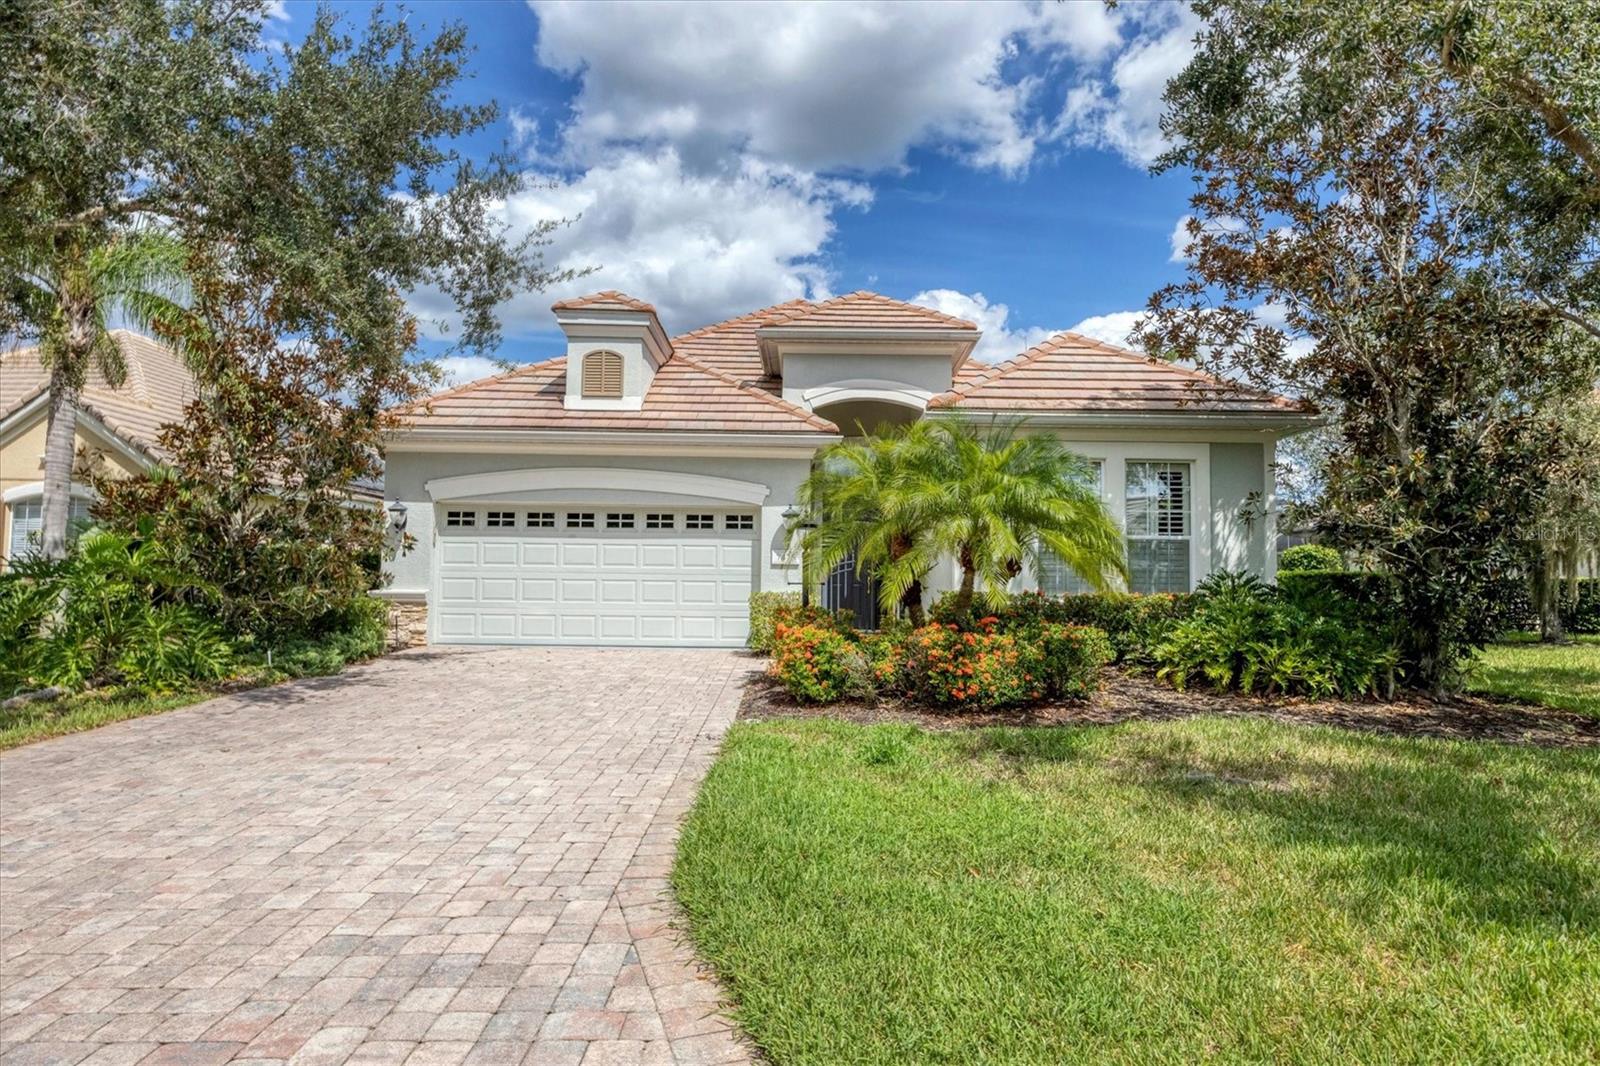 Details for 7475 Edenmore Street, LAKEWOOD RANCH, FL 34202